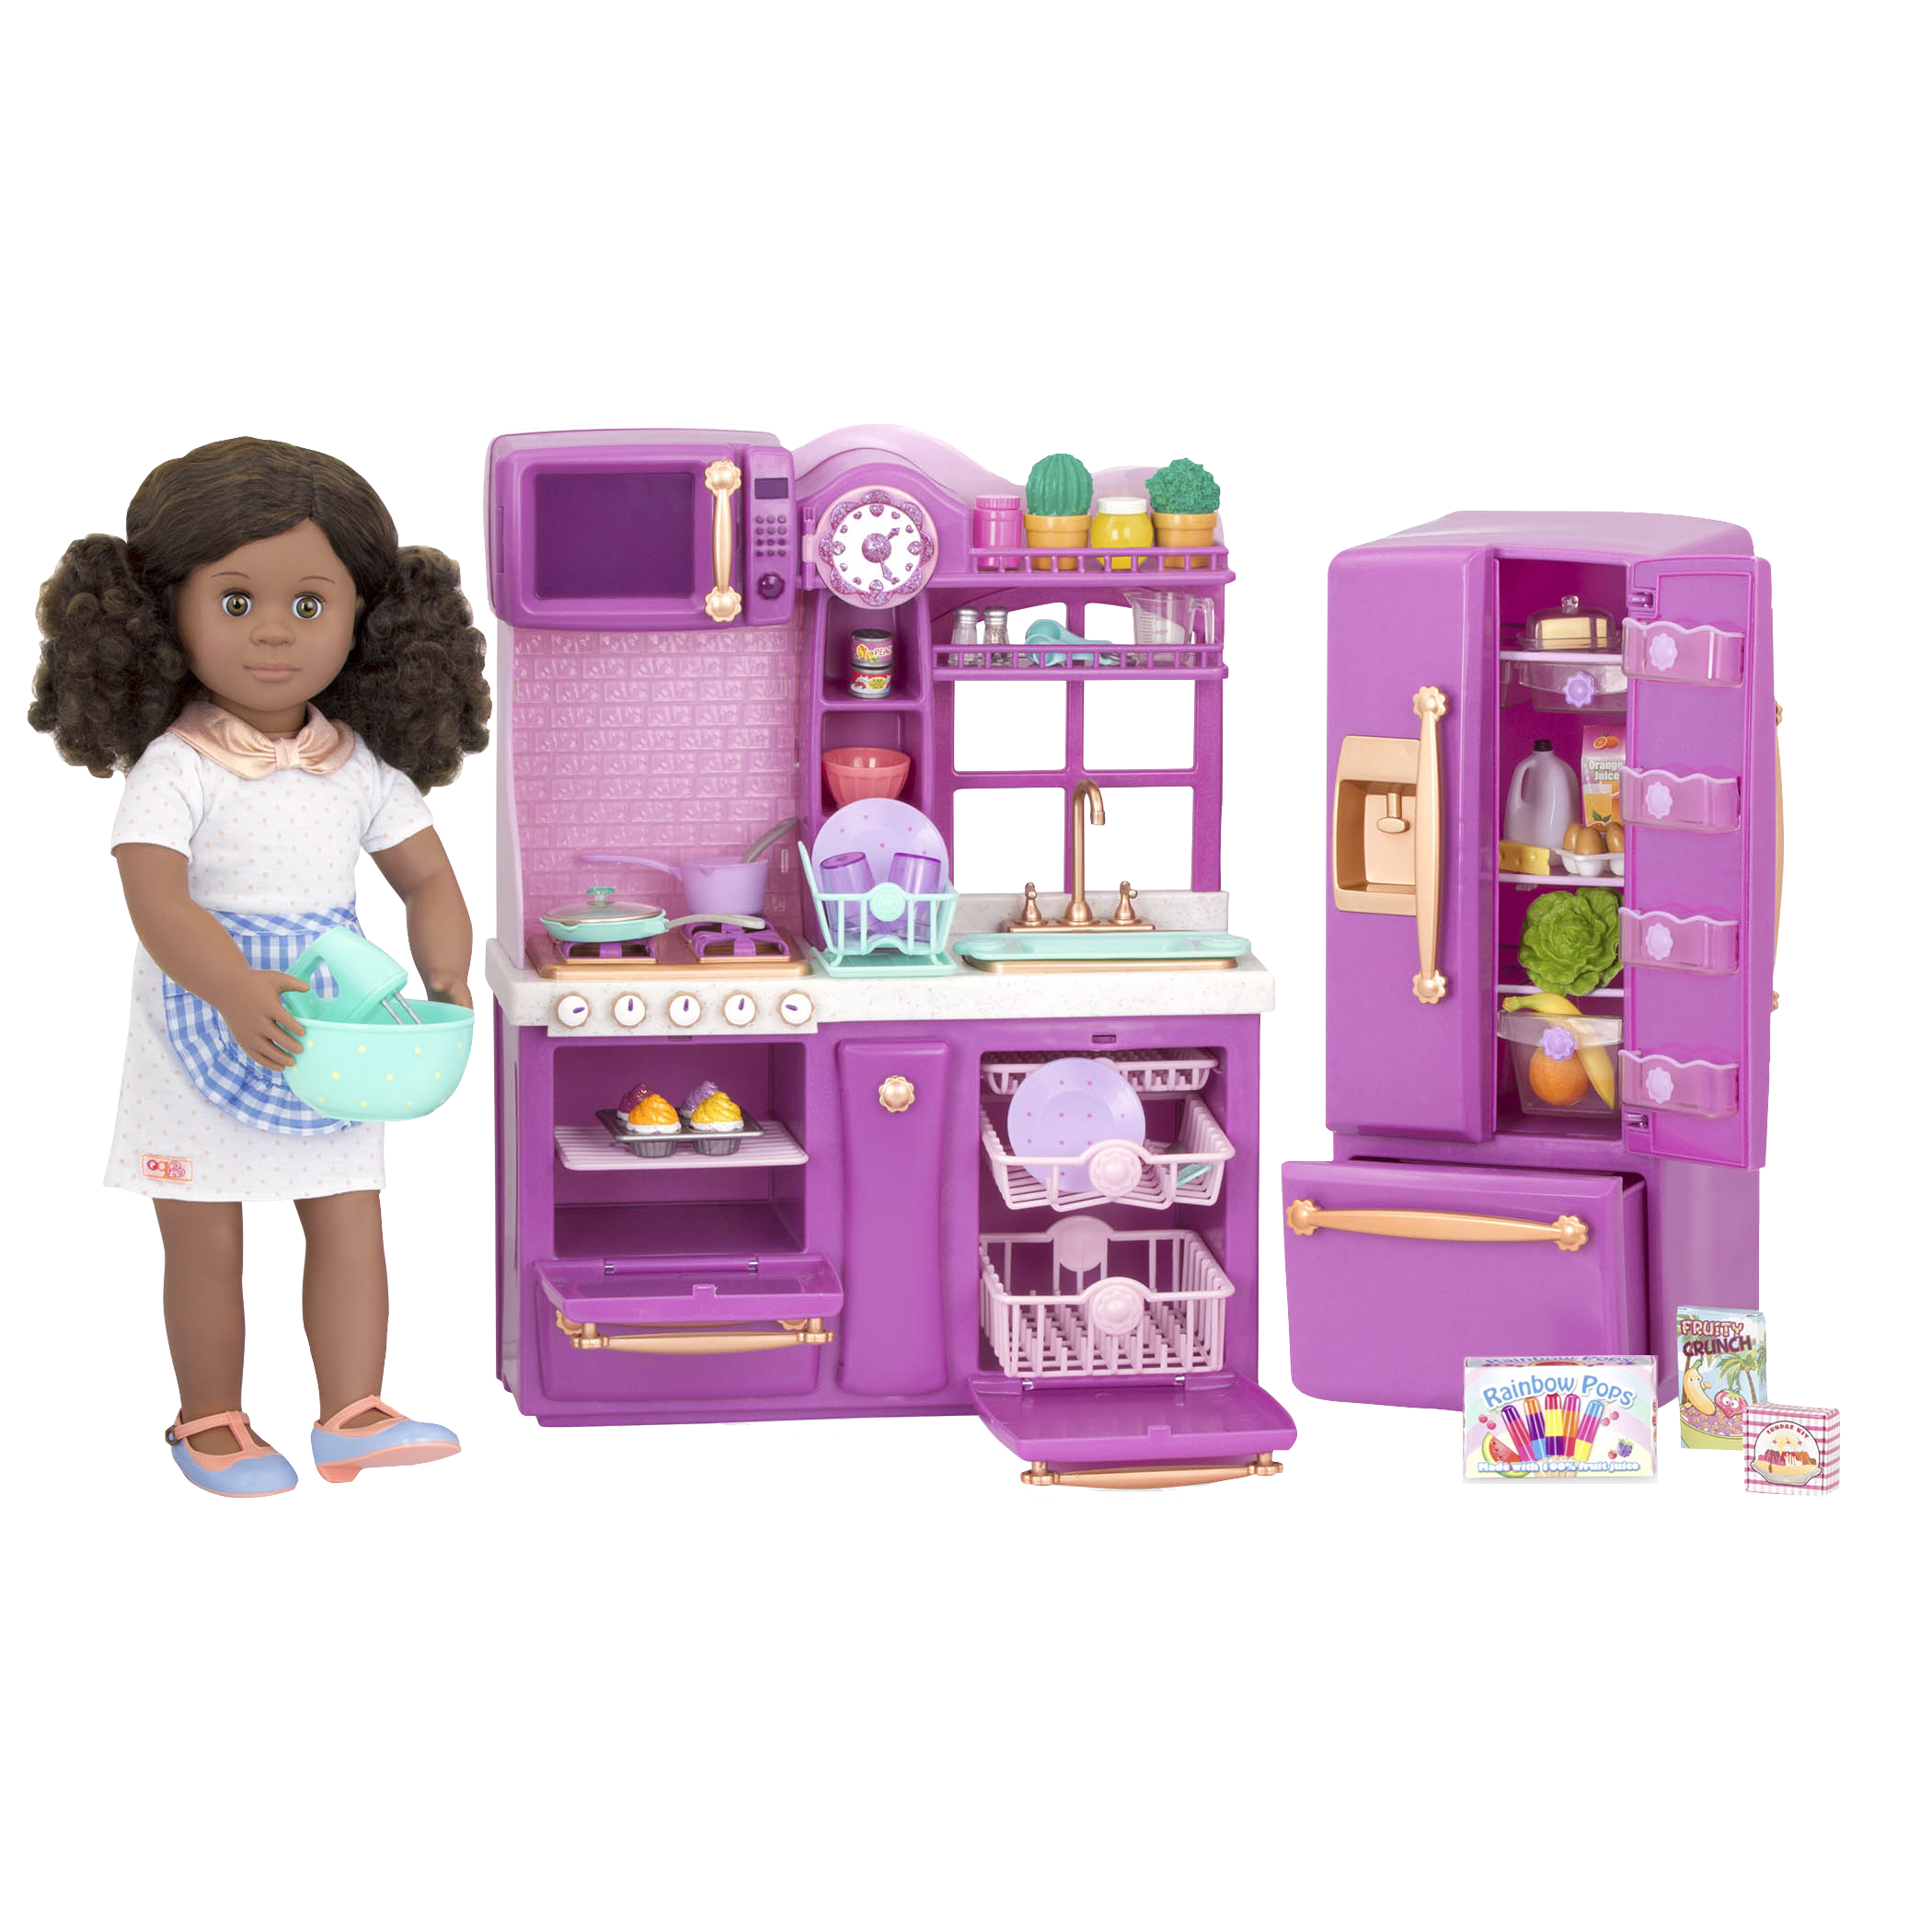 https://ourgeneration.com/wp-content/uploads/BD37410-Gourmet-Kitchen-Set-Purple-with-Nahla-doll03.png